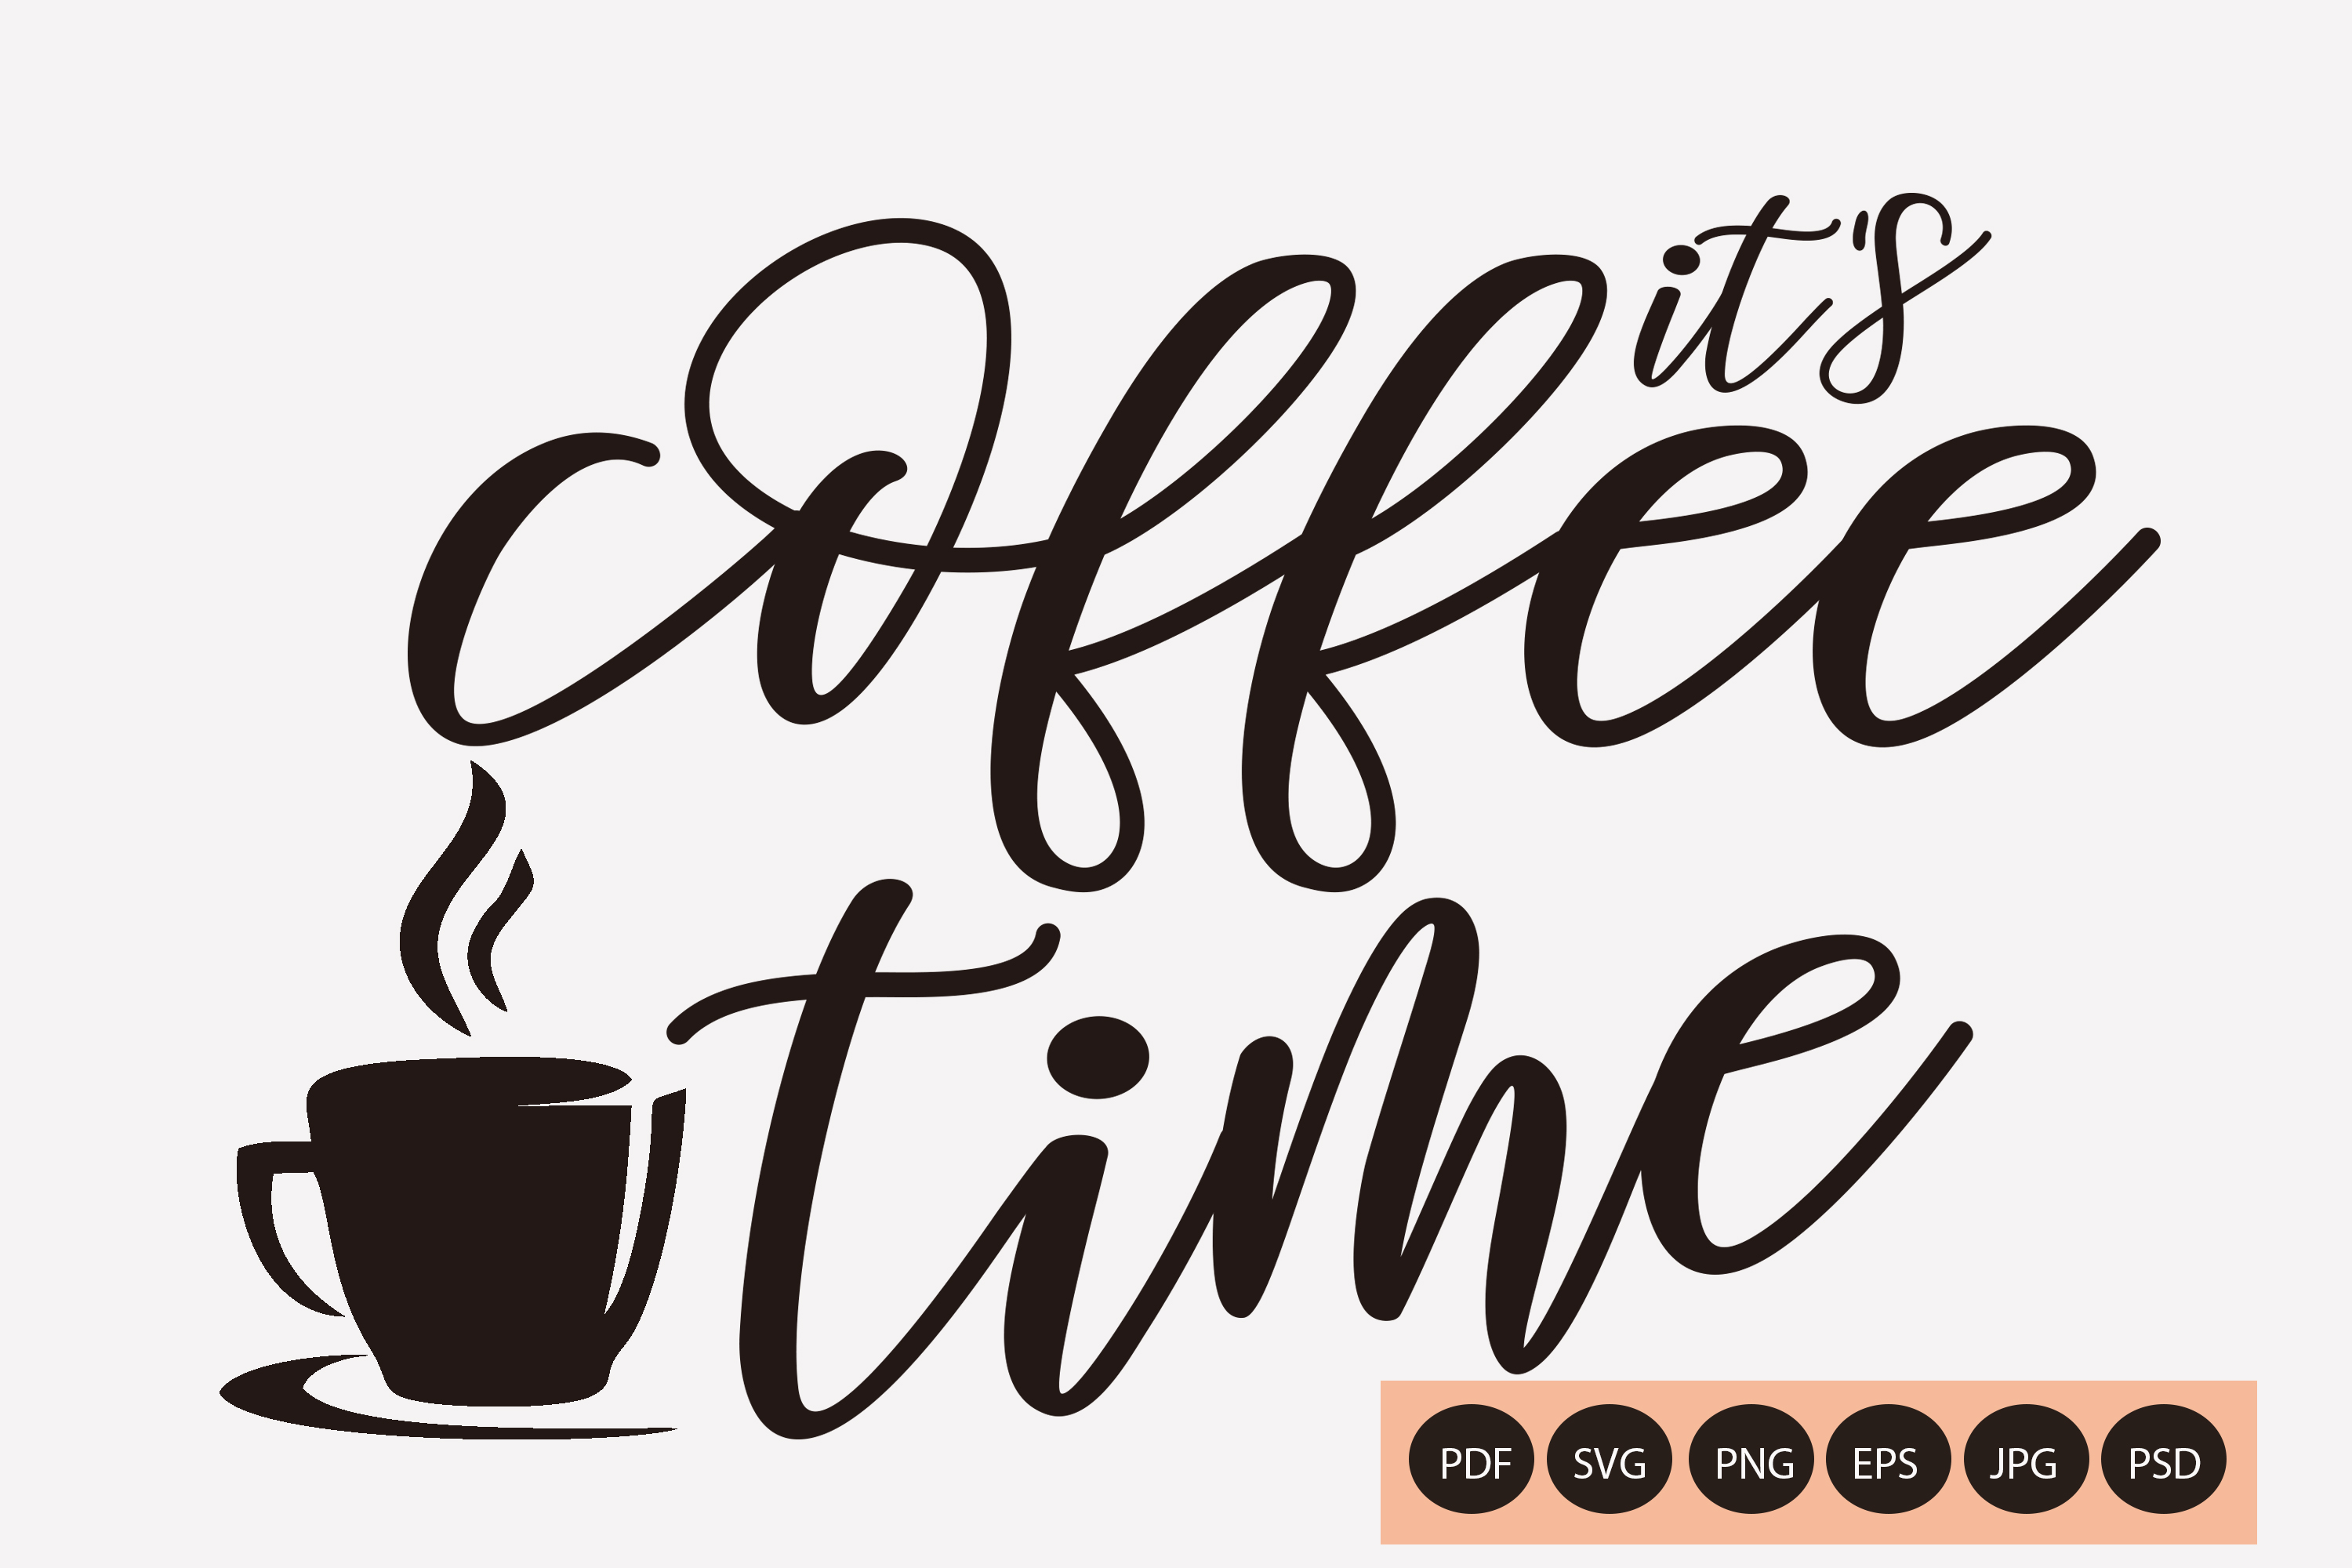 It S Coffee Time Svg Png Pdf Eps Jpg And Psd 126459 Other